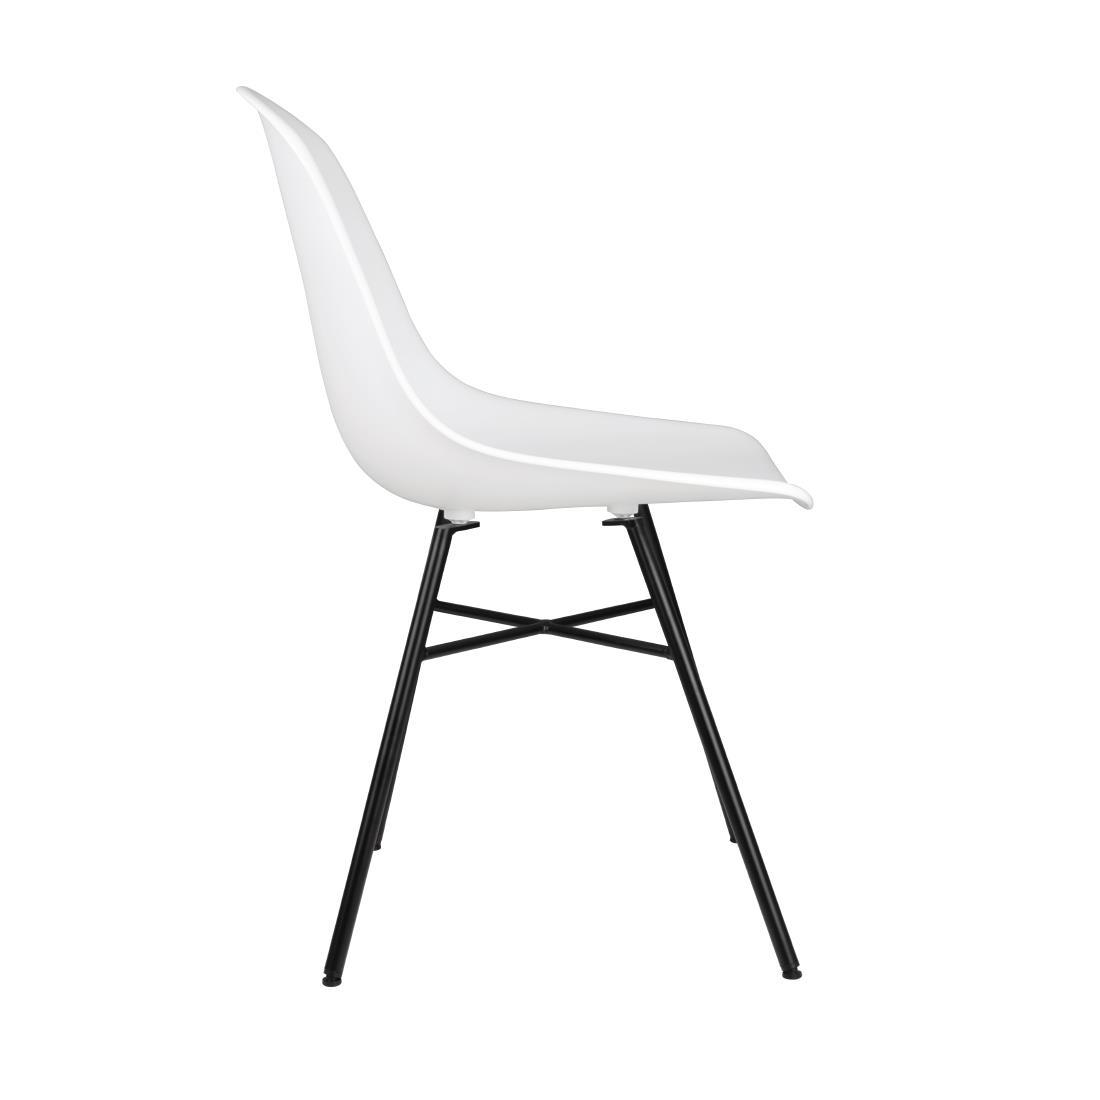 Bolero Arlo Side Chairs with Metal Frame White (Pack of 2) - DY348  - 2